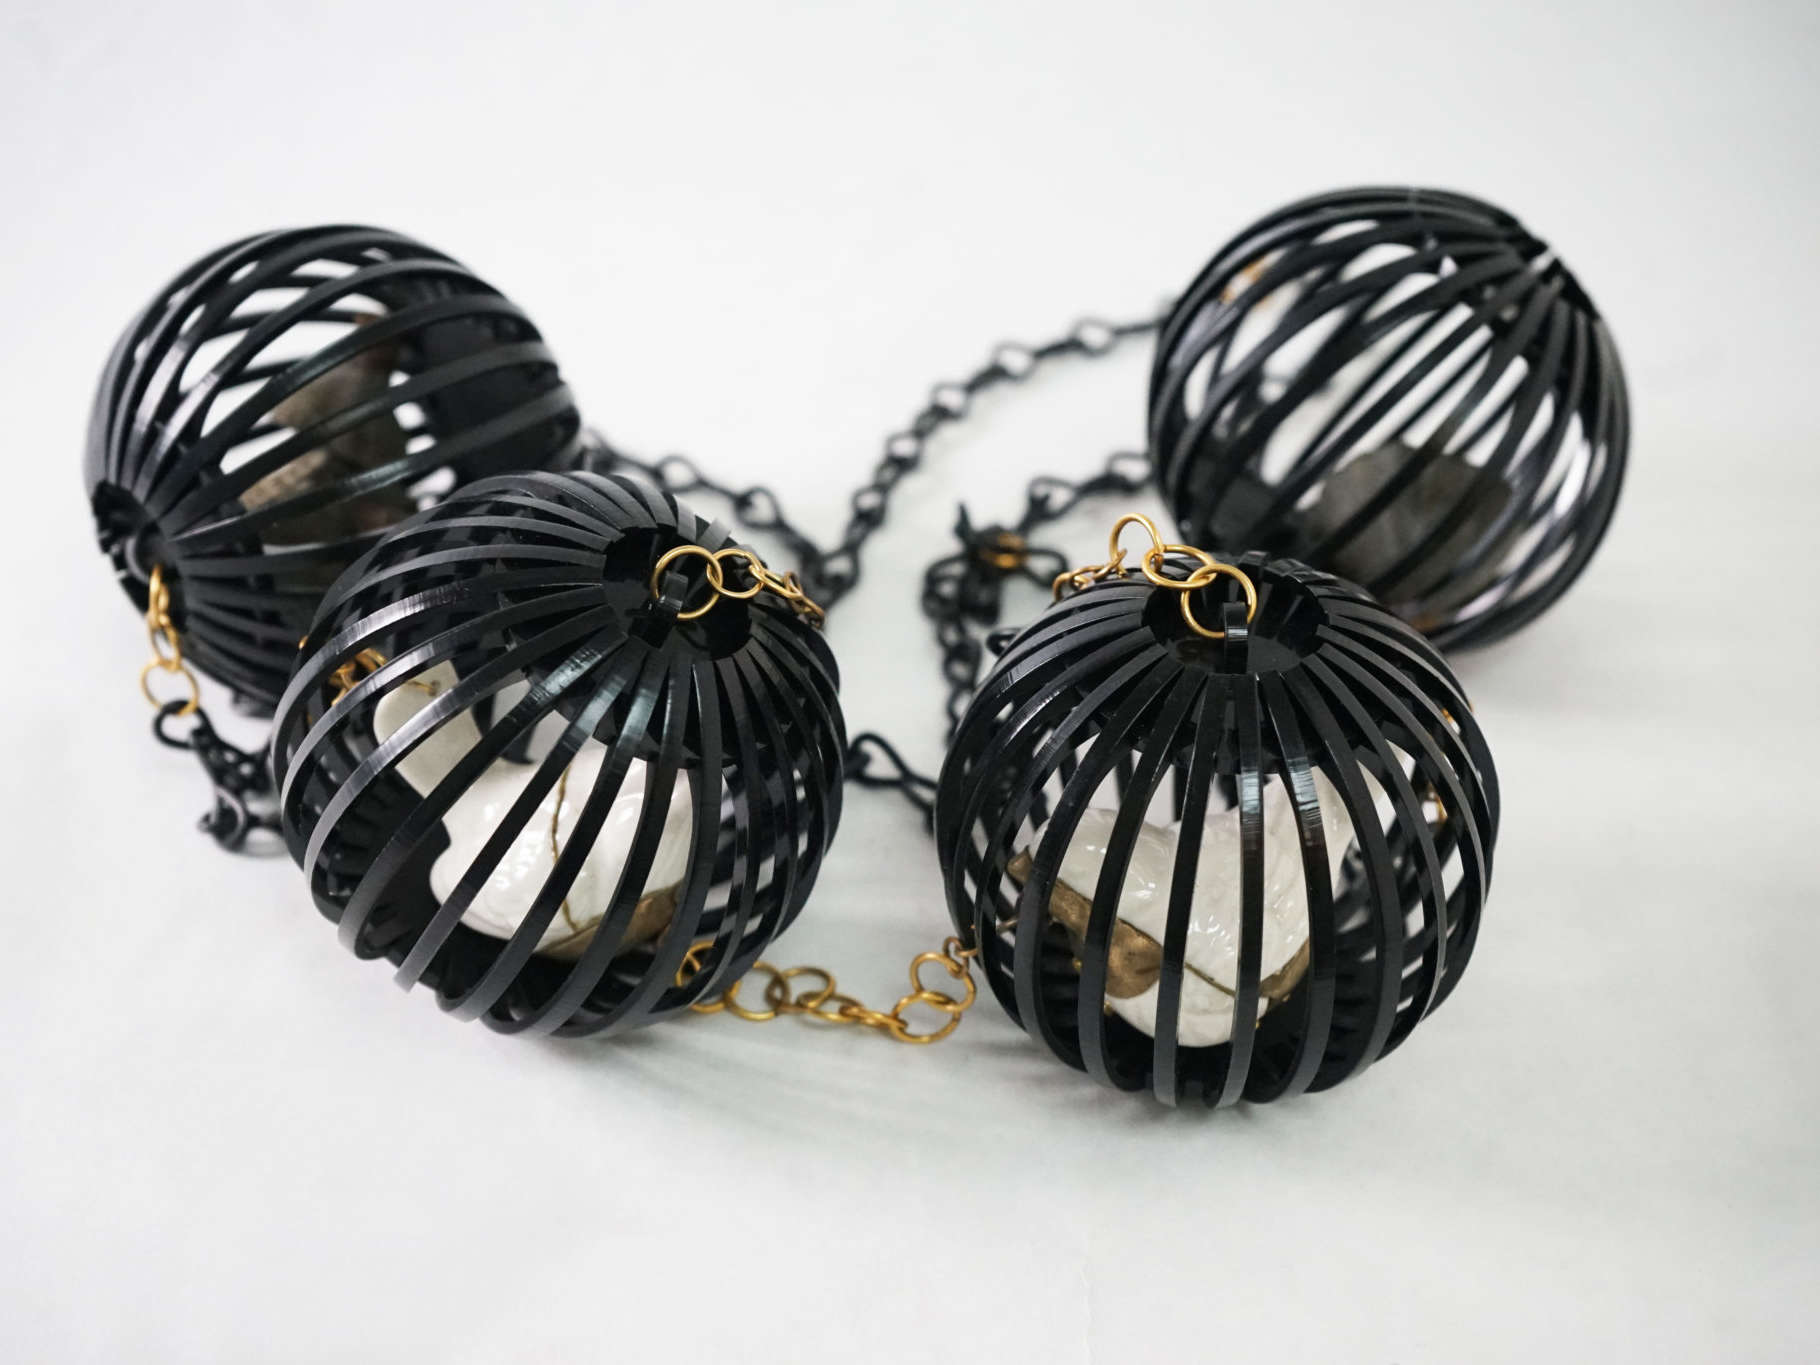 Necklace by Academy student Yiyang Wang